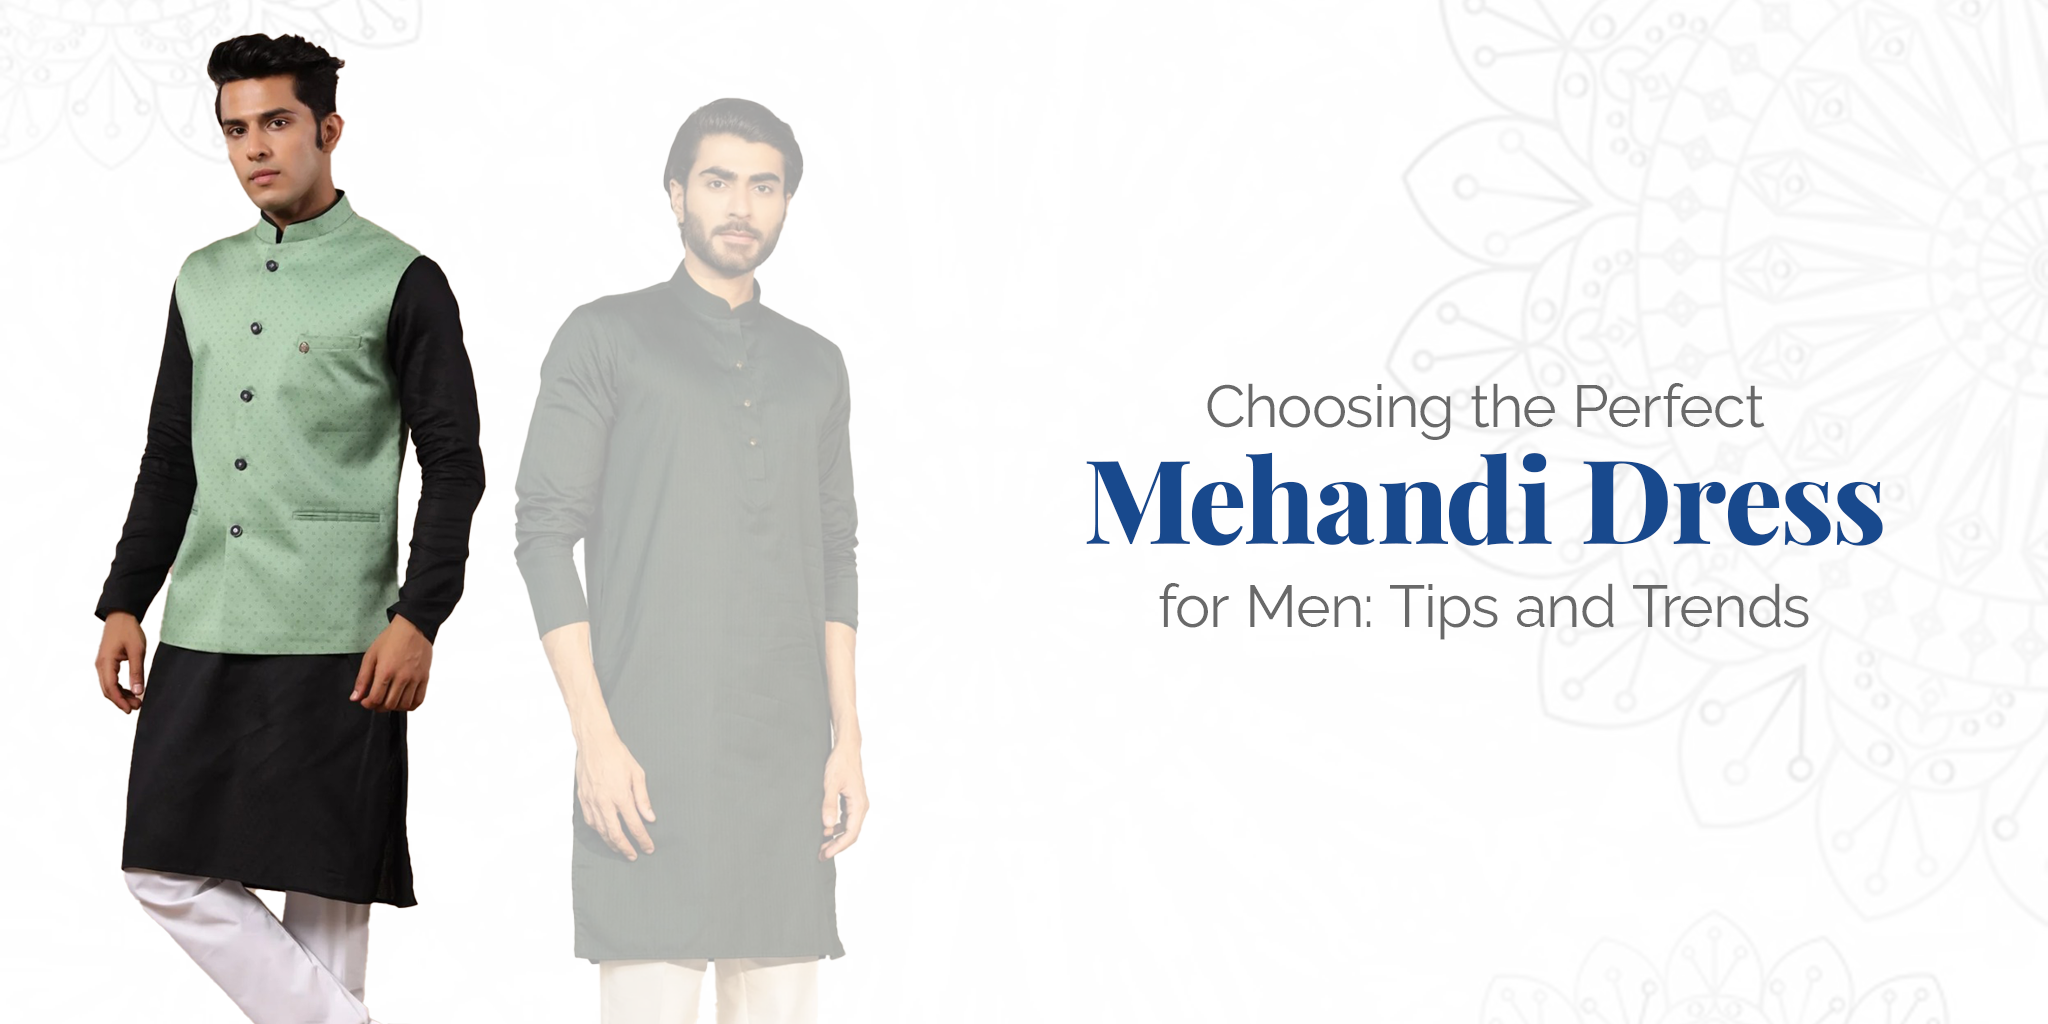 Choosing the Perfect Mehandi Dress for Men: Tips and Trends